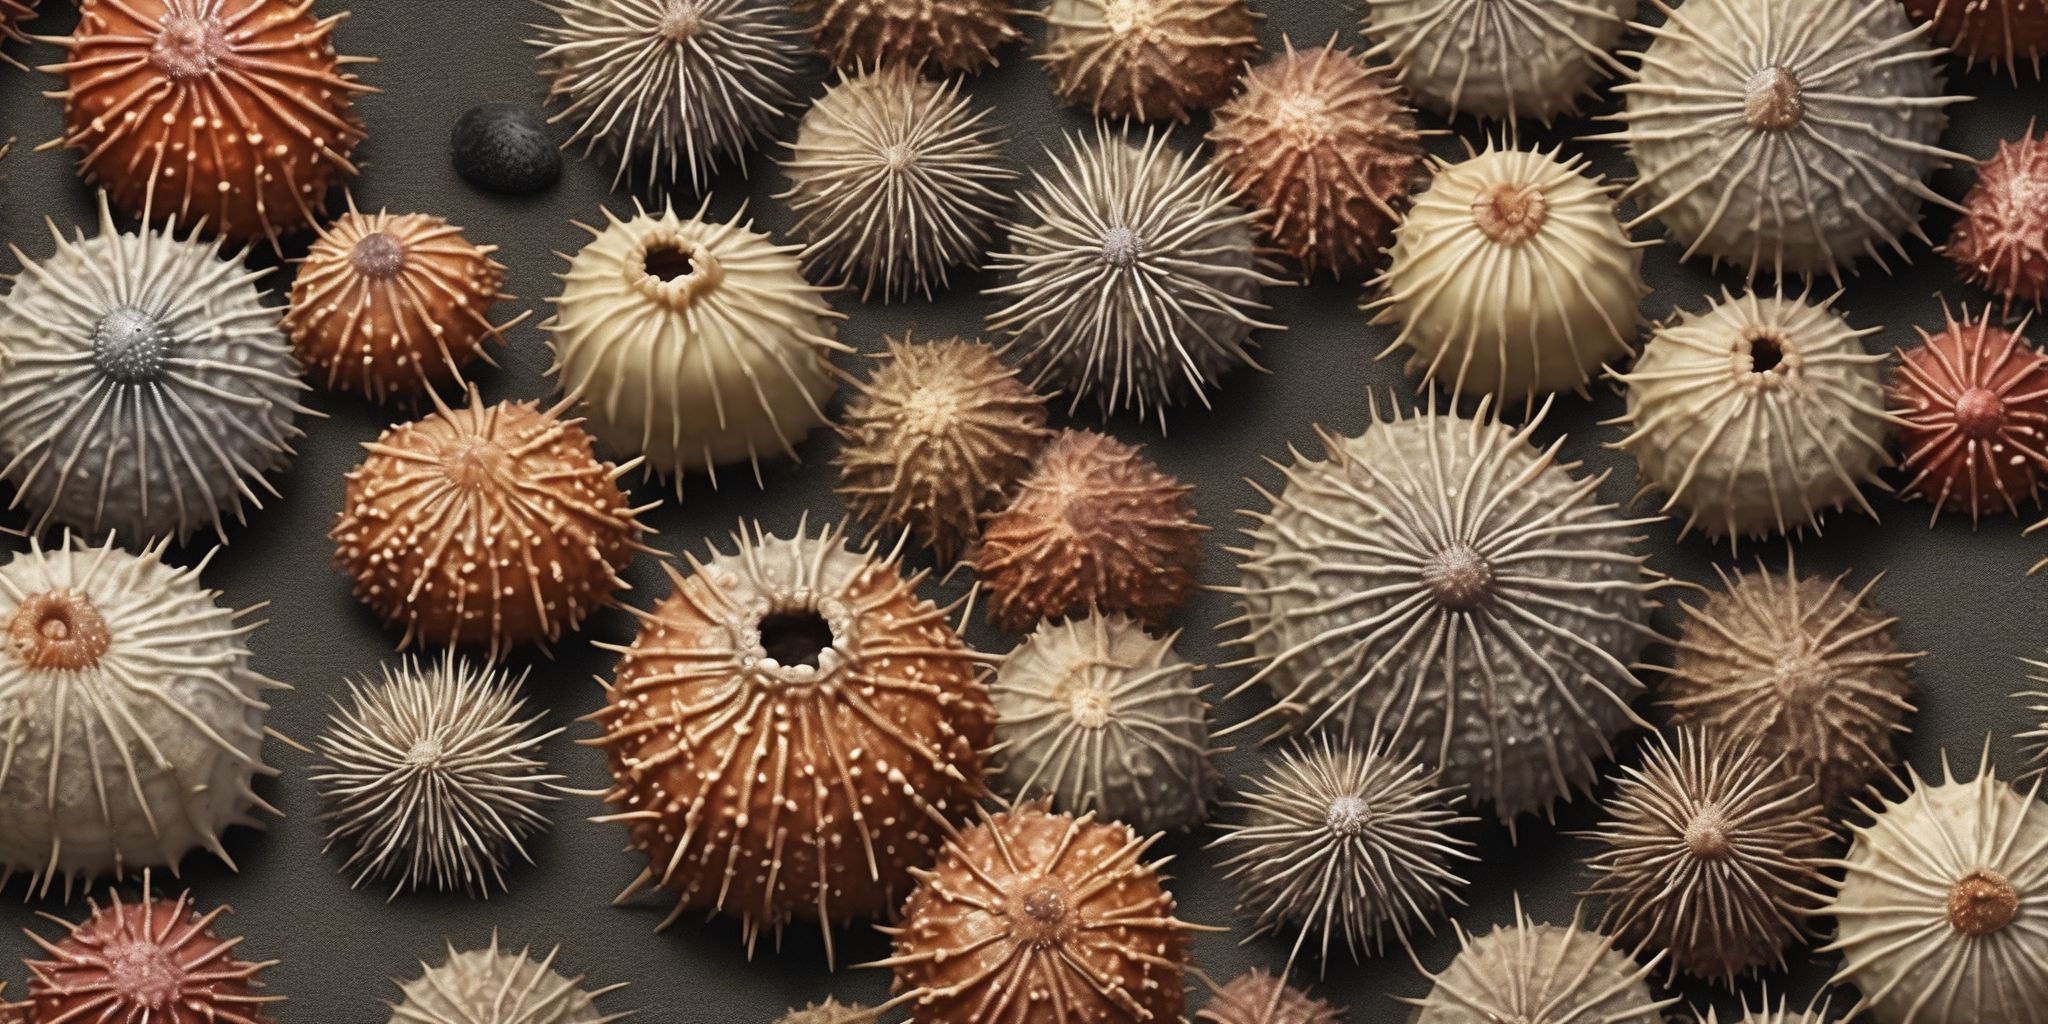 Collection urchin  in realistic, photographic style